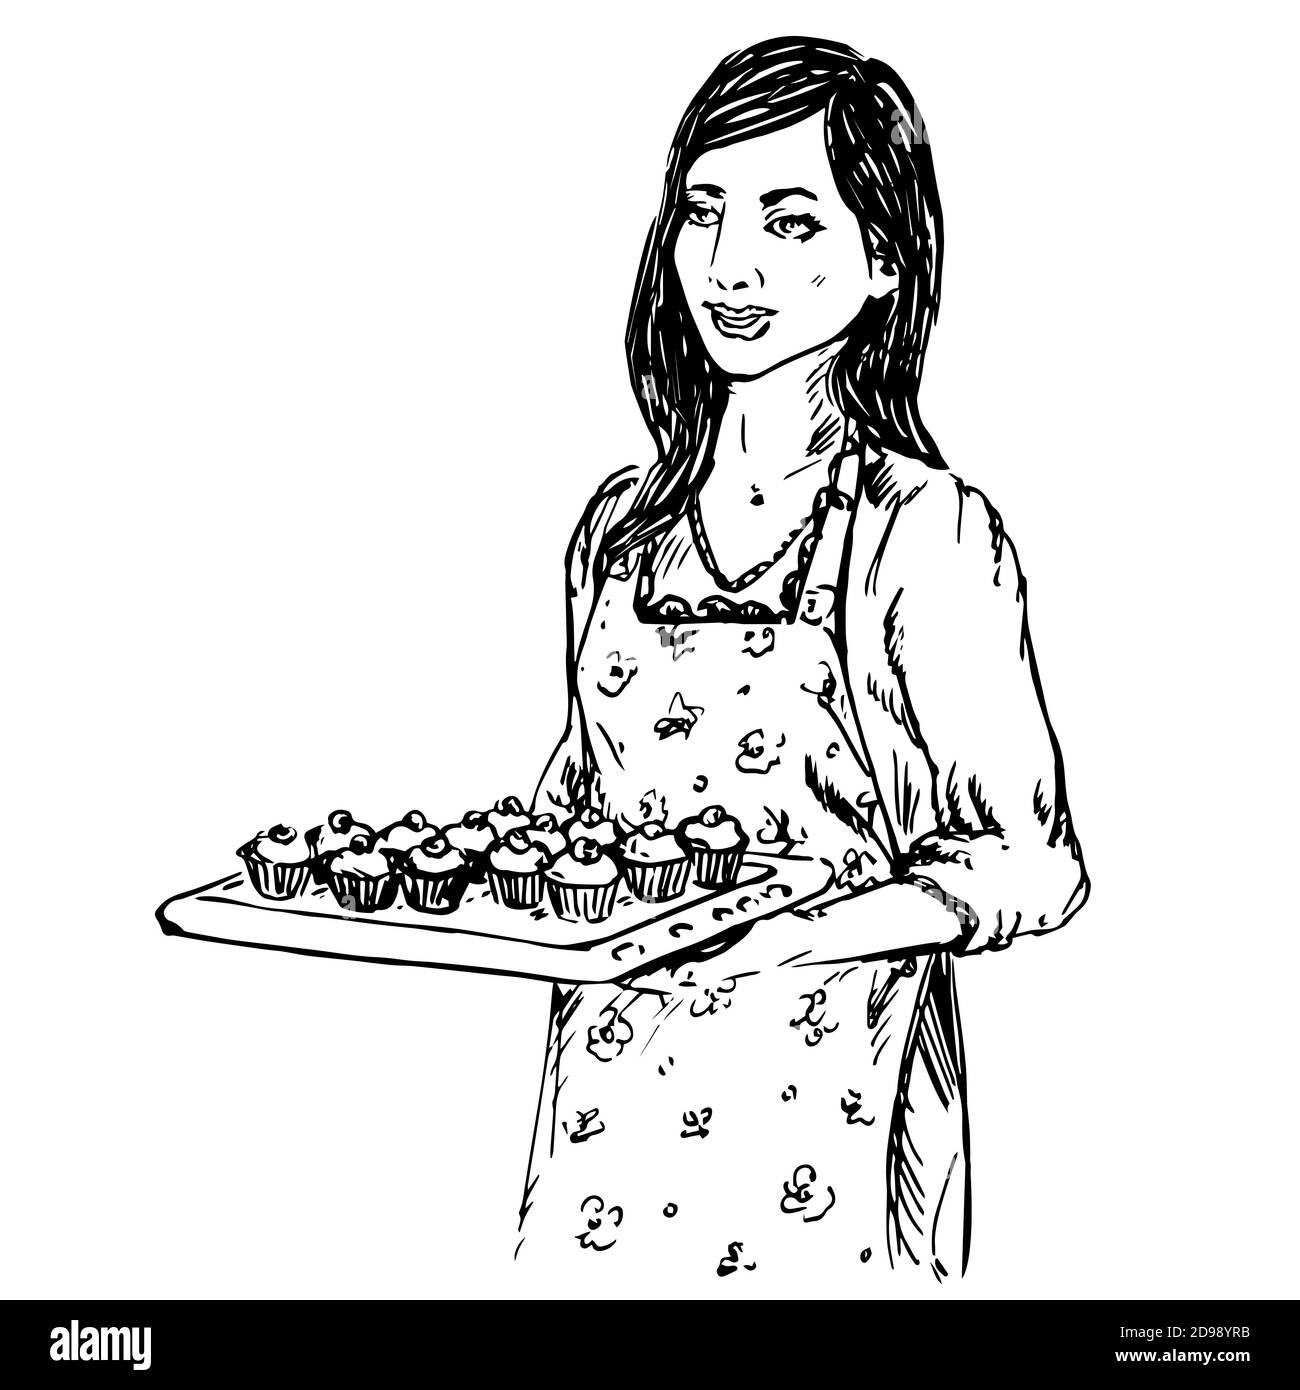 Young housewife dressed in apron, hold a baking tray with cupcakes, hand drawn doodle, sketch, black and white illustration Stock Photo